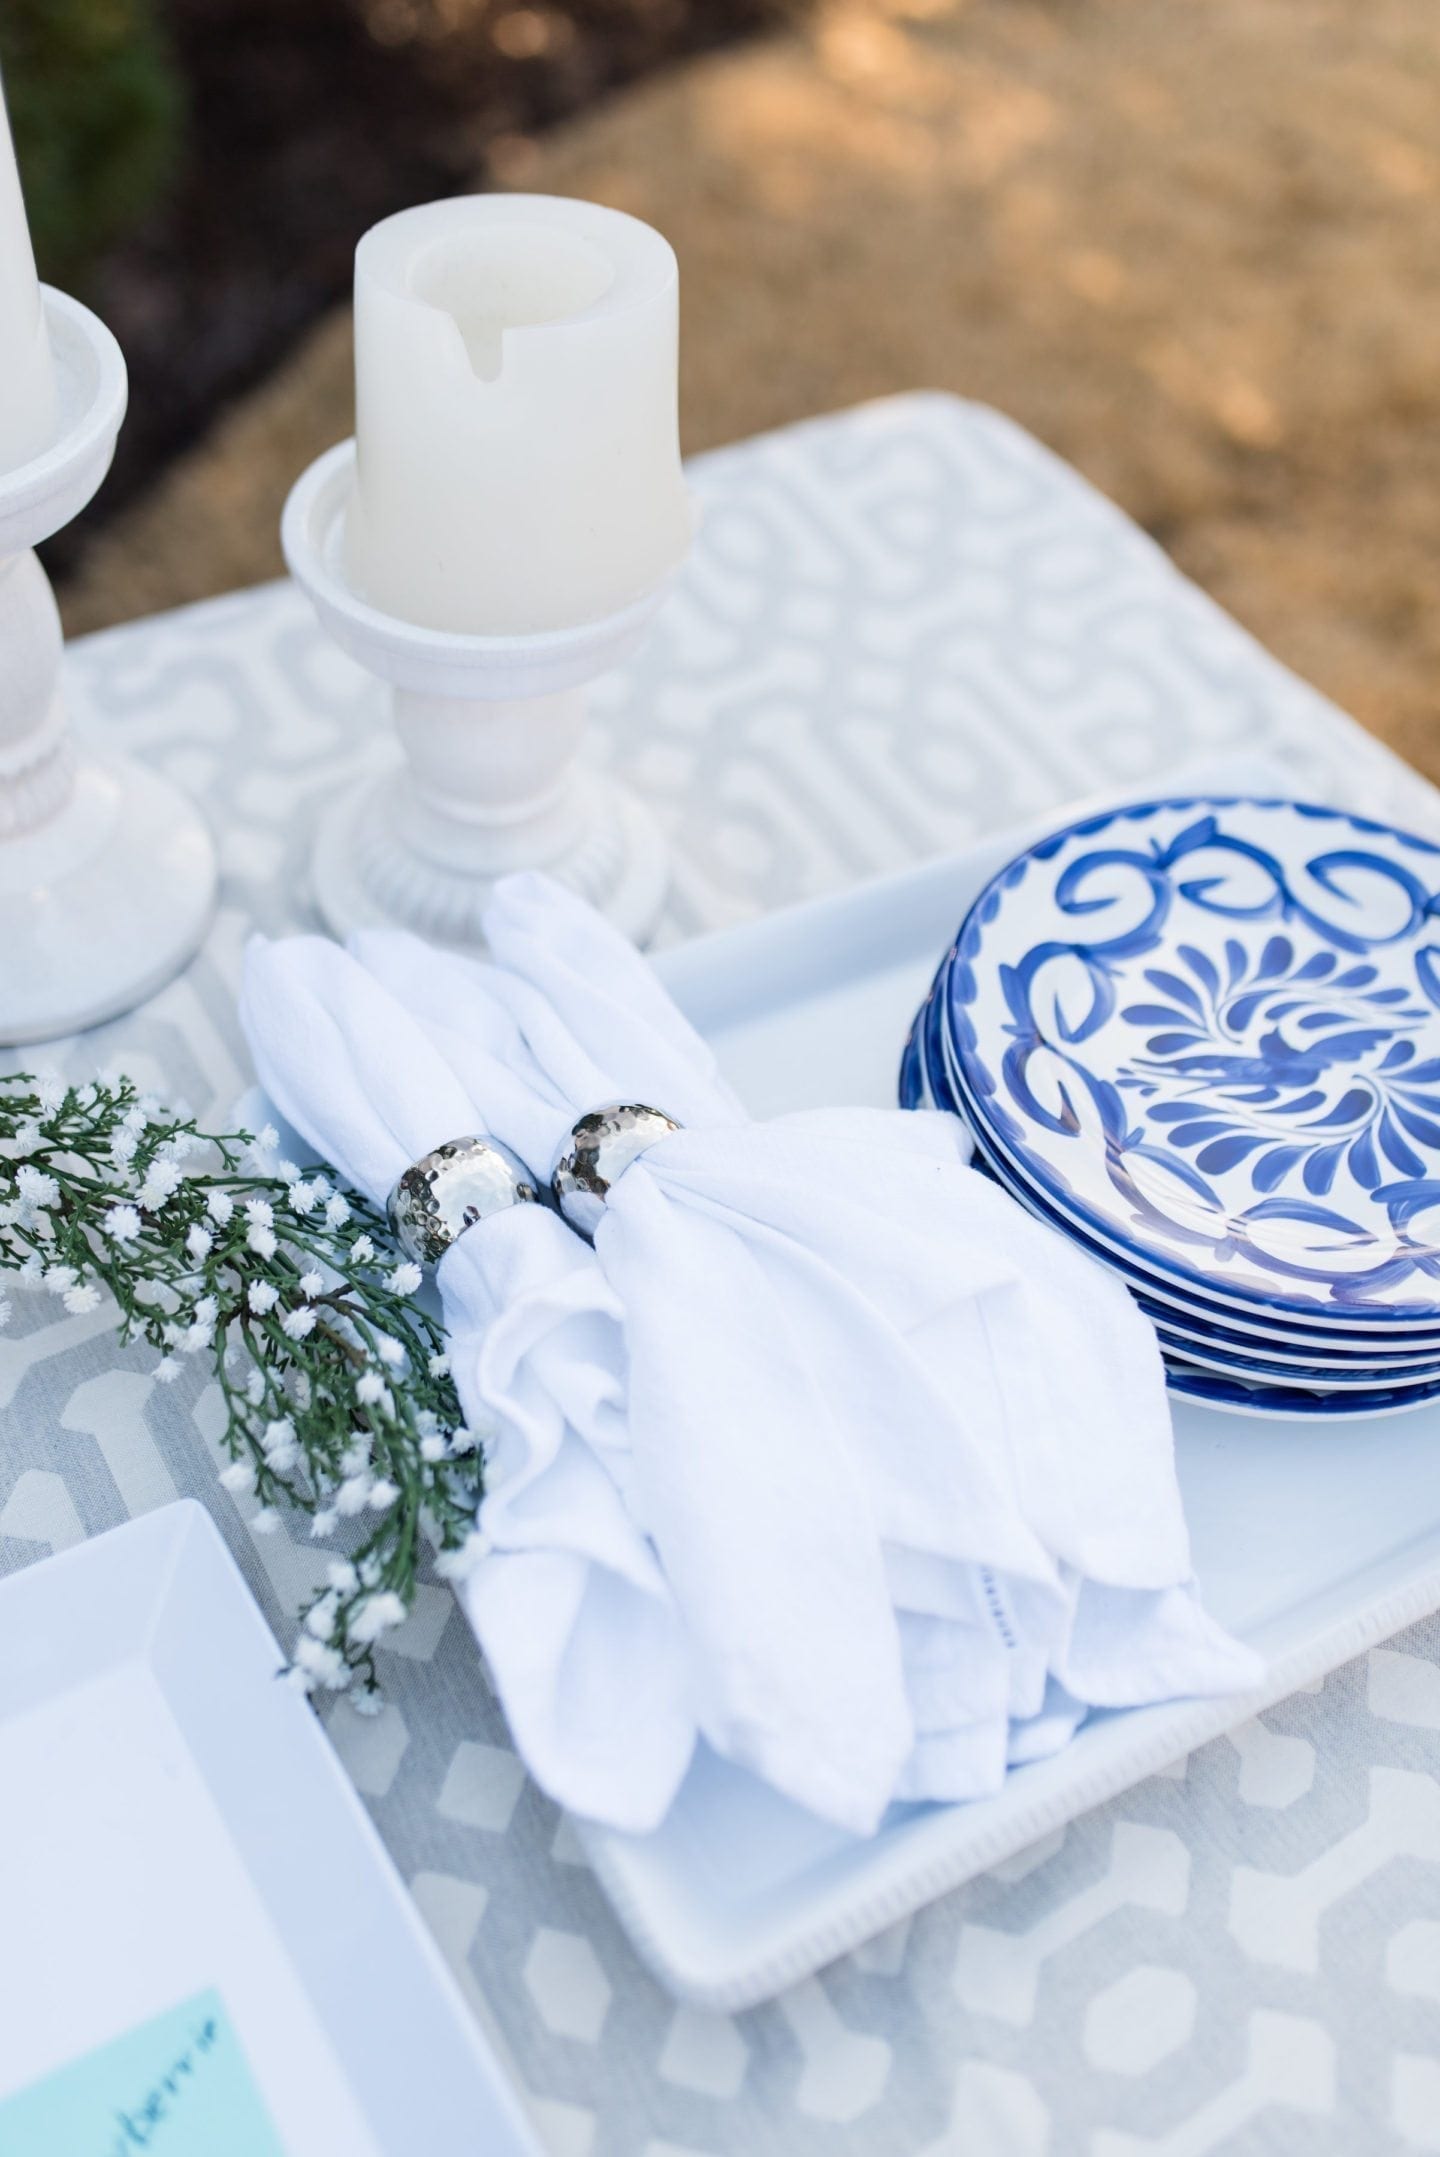 Easy and simple party set up. All white and blue table setting with pretty blue and white plates, white linens and babies breath.